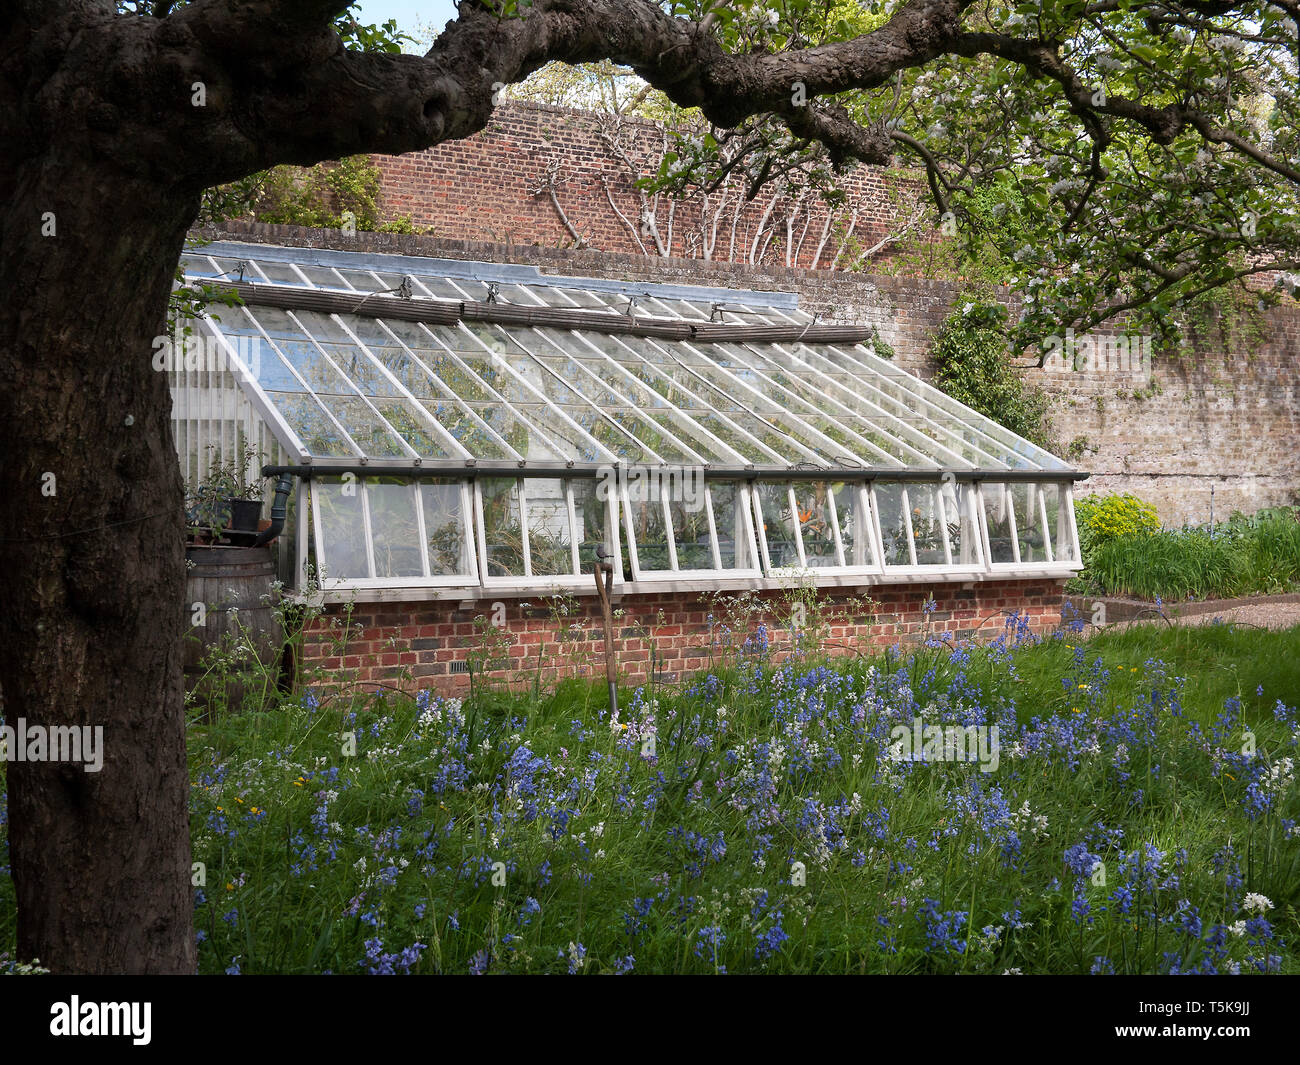 Lean to Greenhouse in a walled garden. Stock Photo